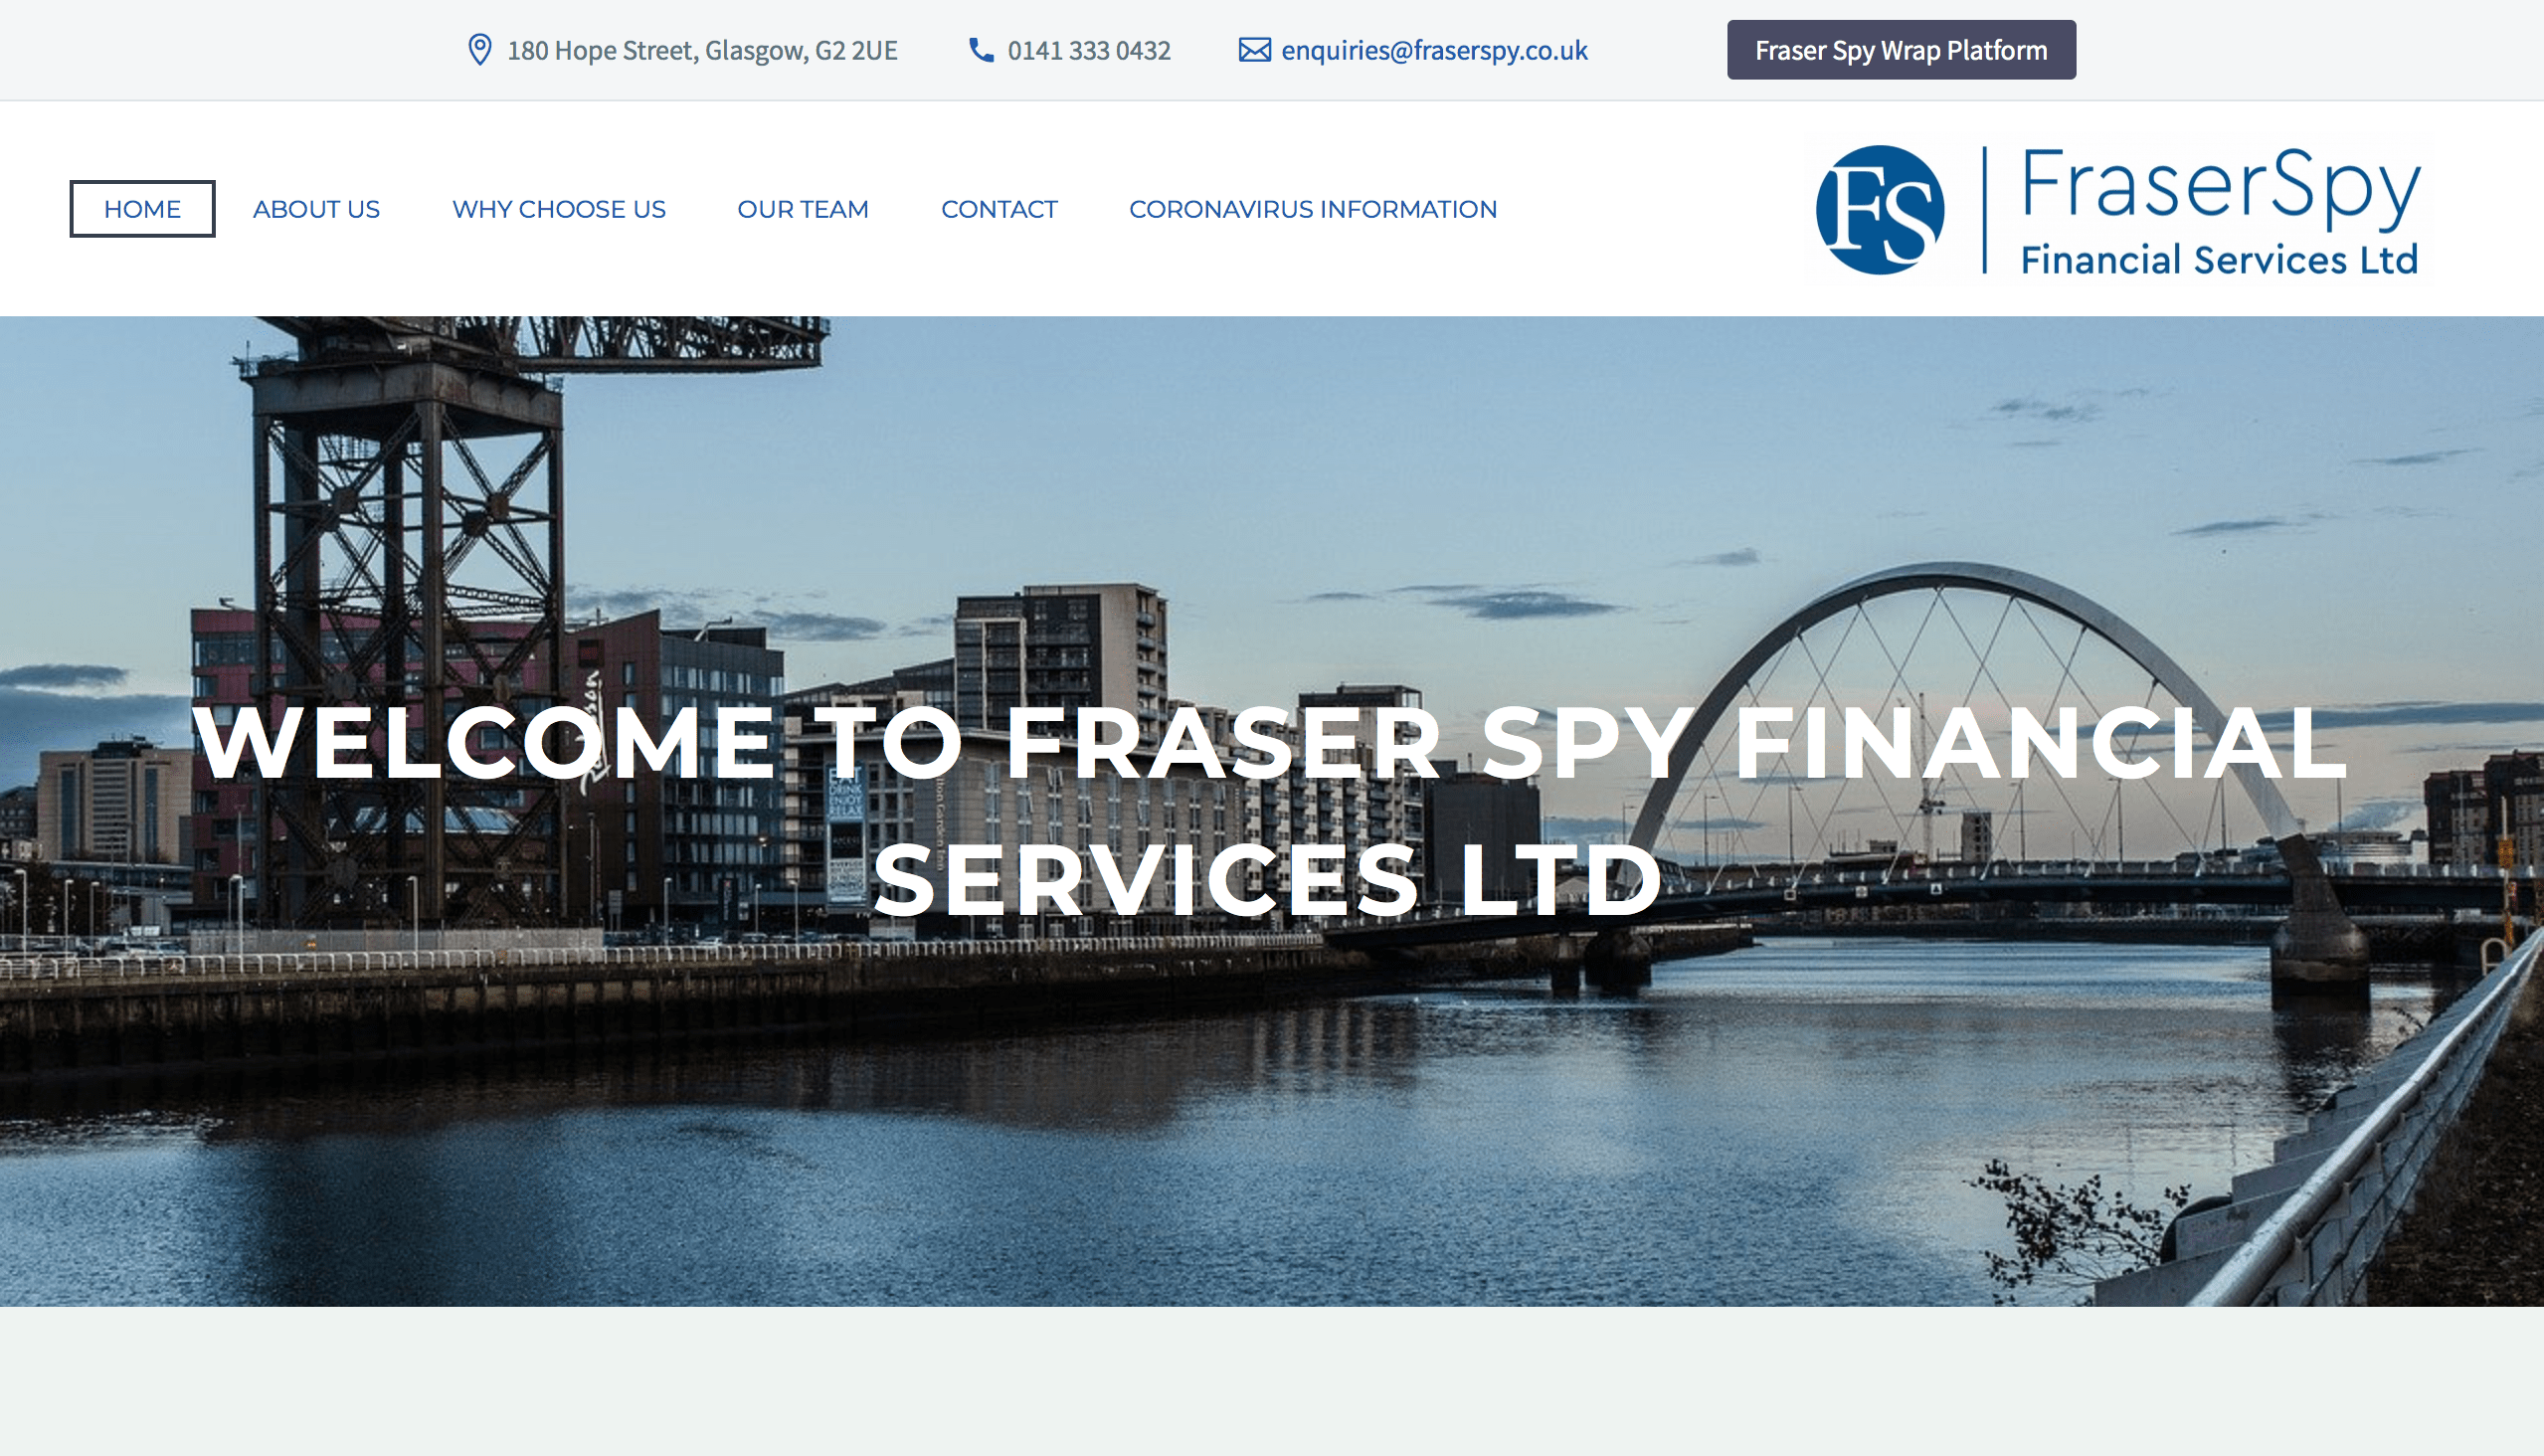 FraserSpy Financial Services